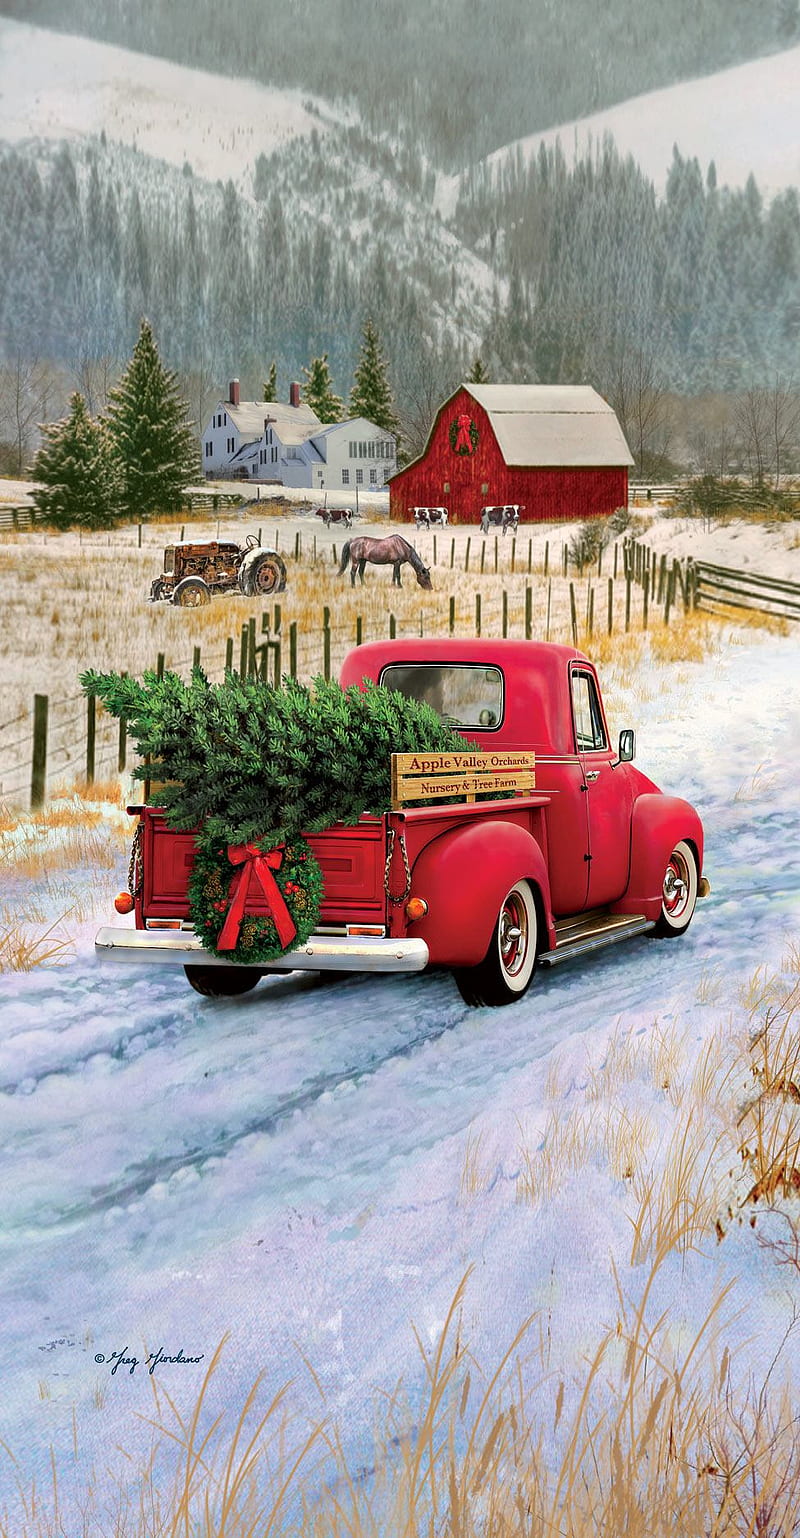 2200 Red Truck Christmas Stock Photos Pictures  RoyaltyFree Images   iStock  Red truck christmas tree Vintage red truck christmas